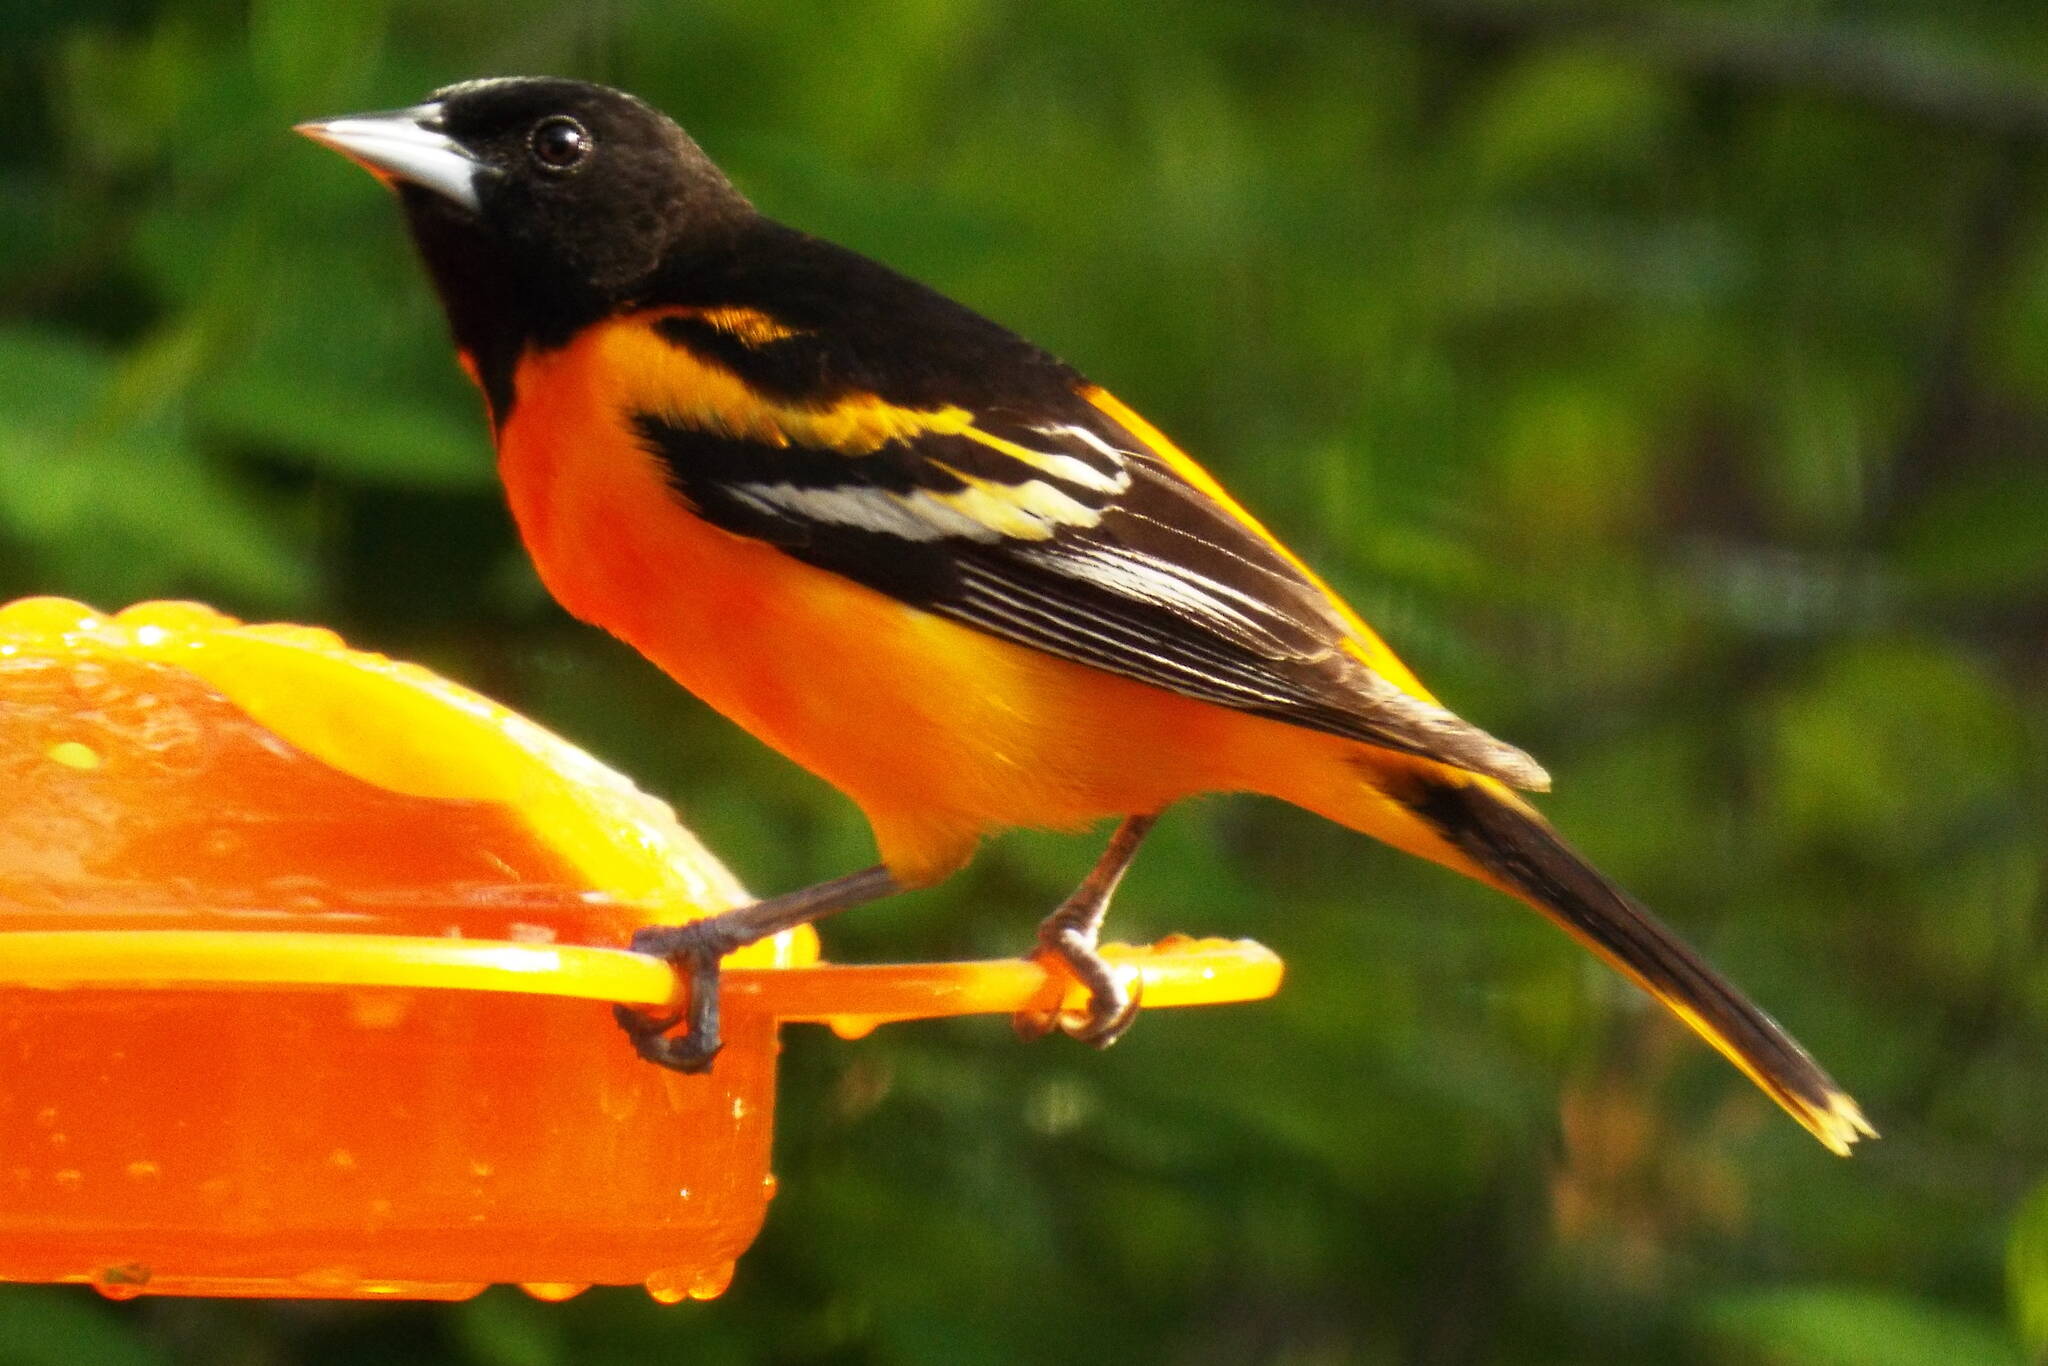 A northern oriole used dietary carotenoids to make its feathers bright orange. (Courtesy Photo / J. S. Willson)